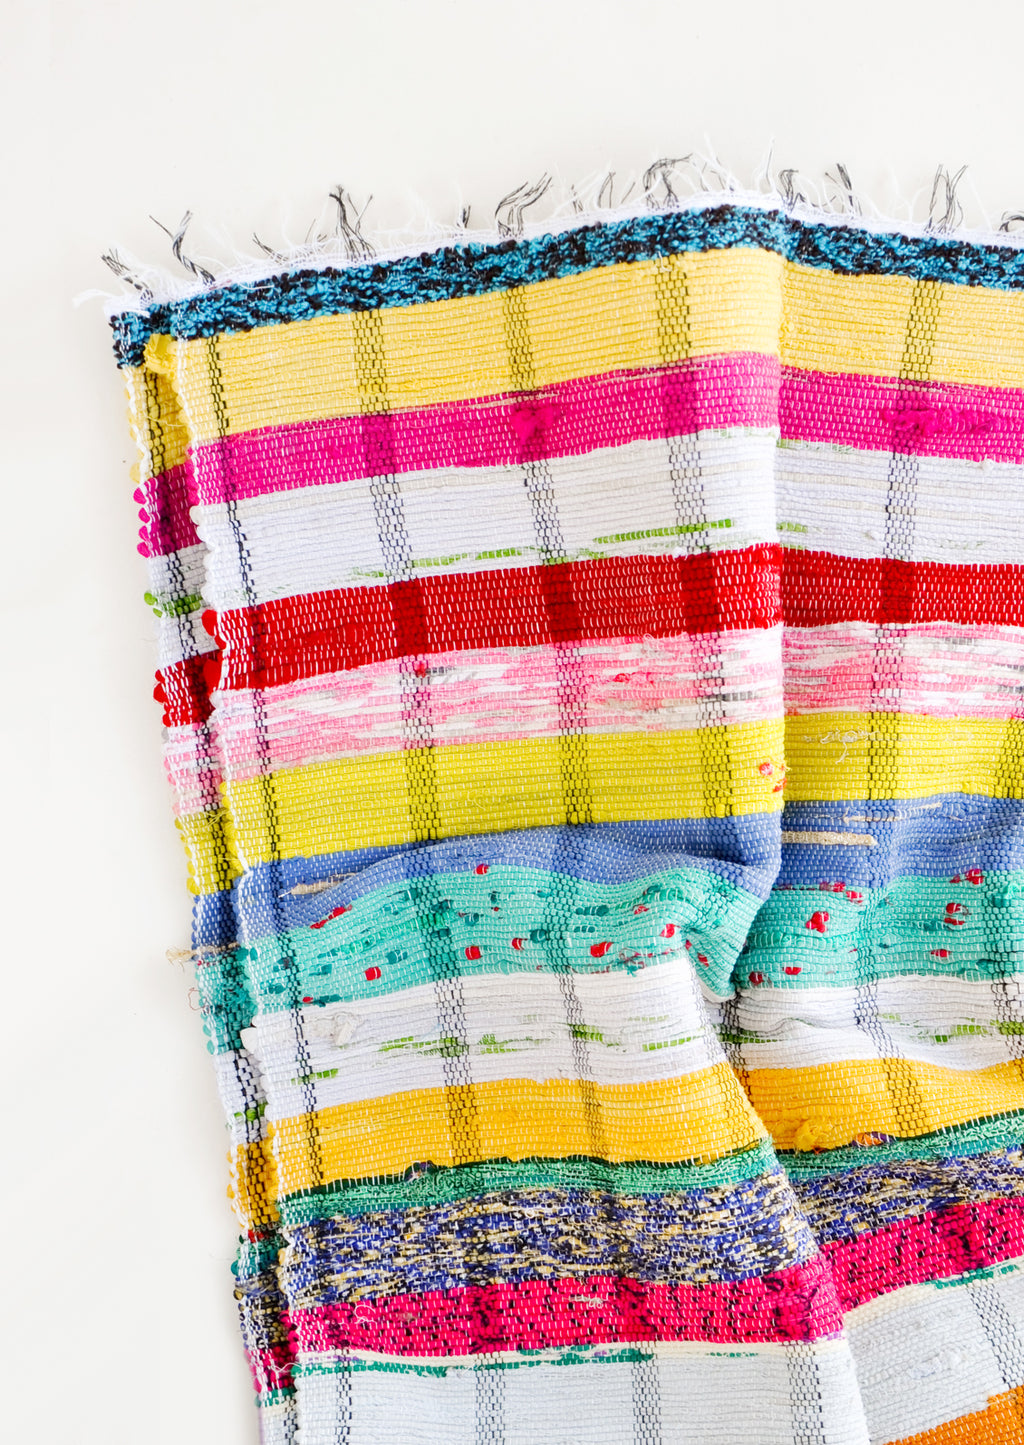 1: Multicolor striped cotton blanket in a bright mix of hues